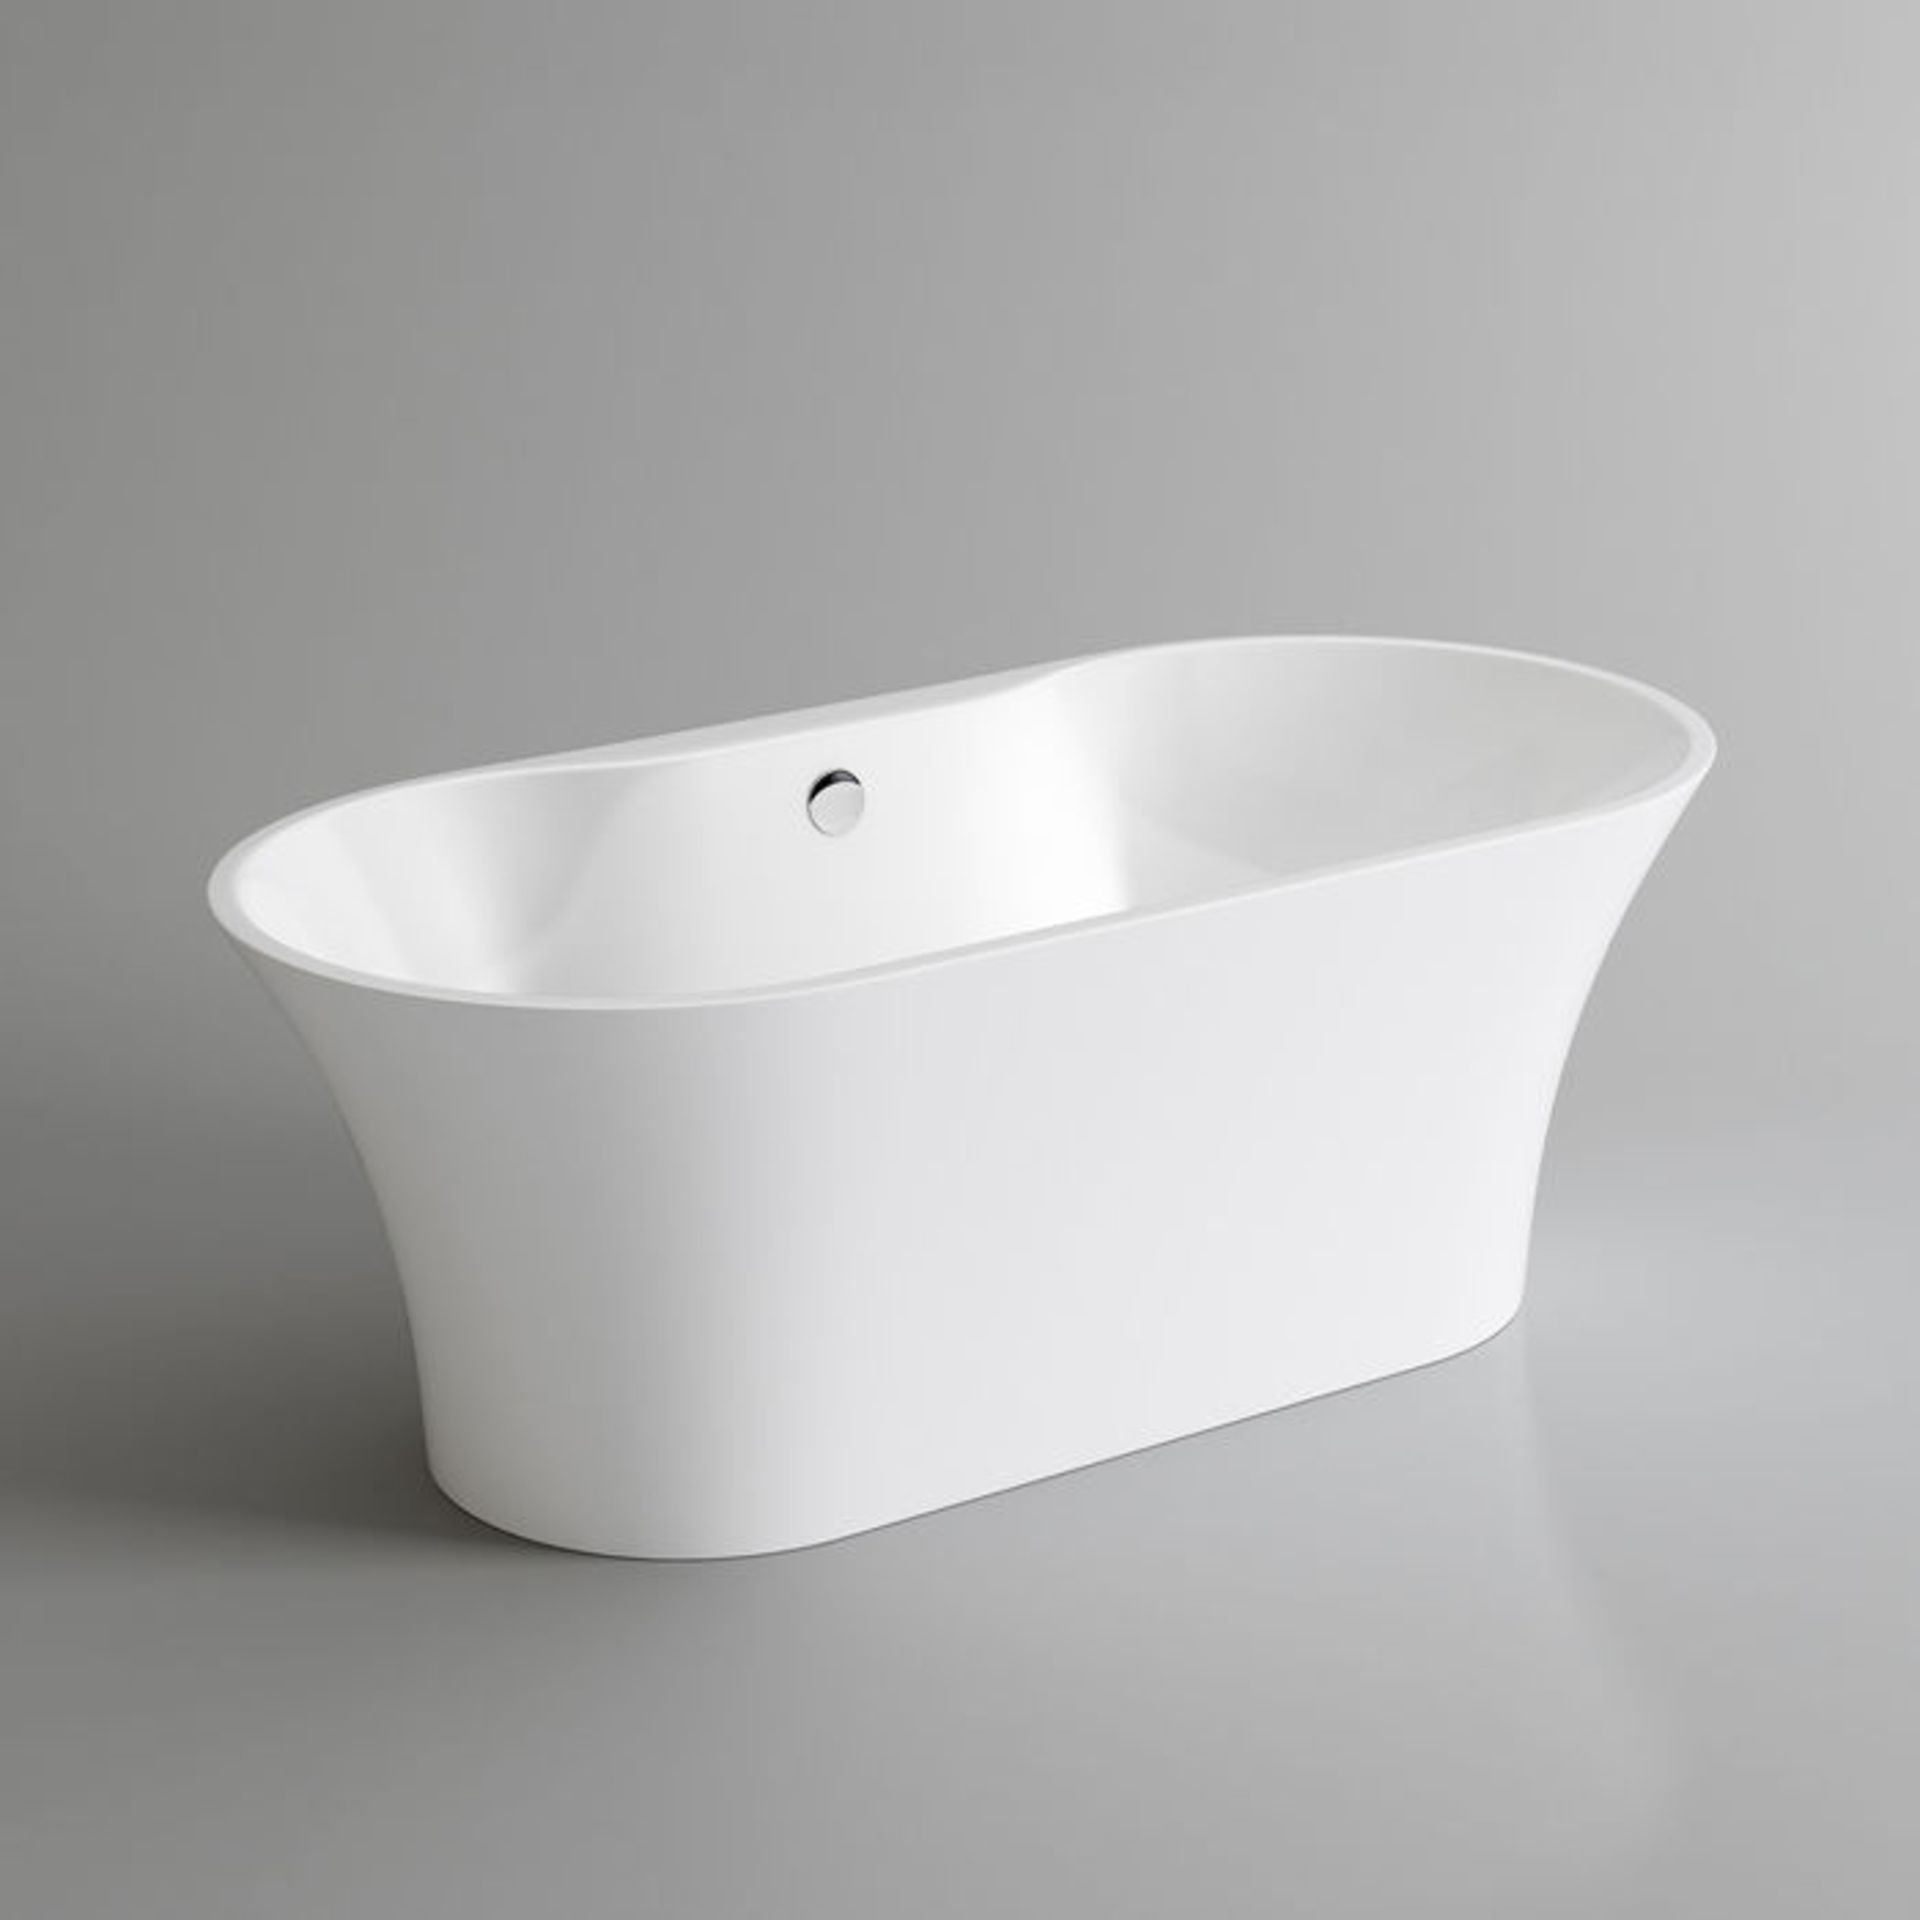 NEW & BOXED 1600x750mm Ella Freestanding Bath. Manufactured from High Quality Acrylic, complim... - Image 3 of 3